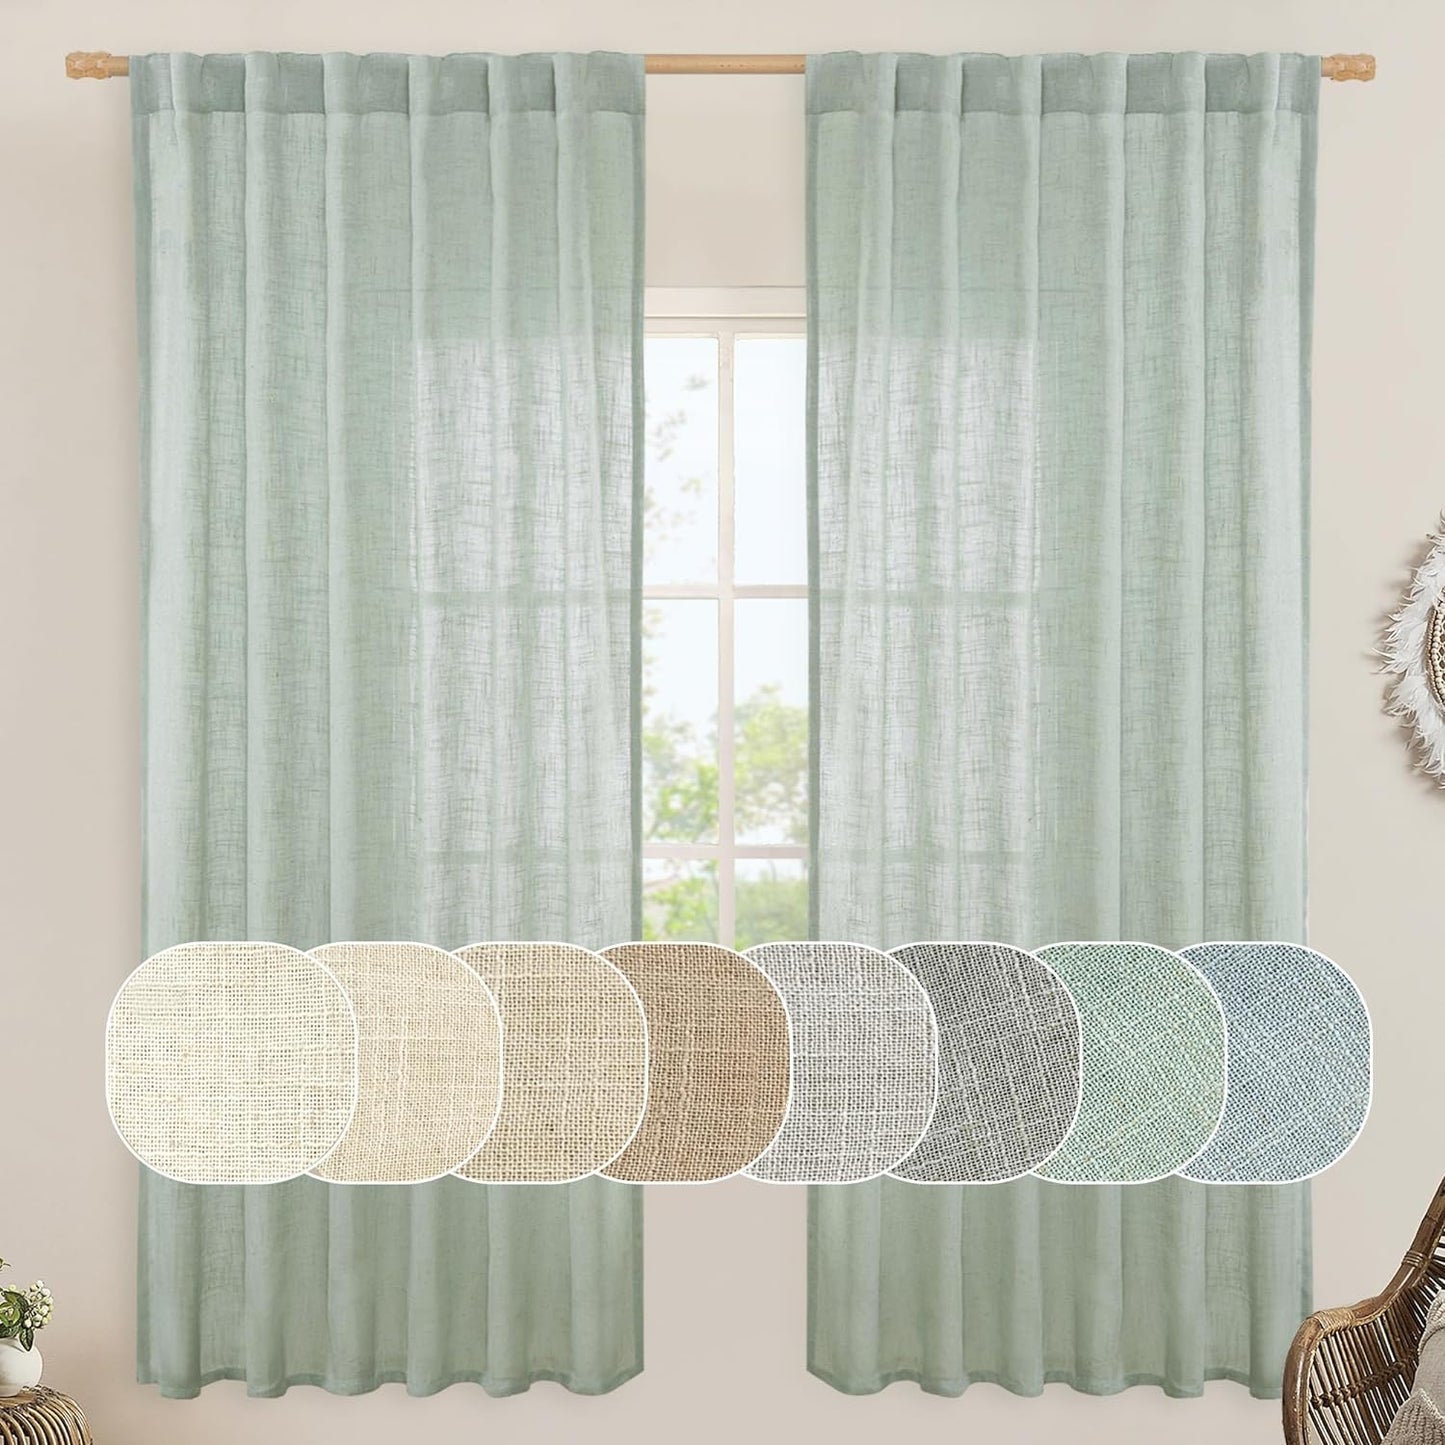 LAMIT Natural Linen Blended Curtains for Living Room, Back Tab and Rod Pocket Semi Sheer Curtains Light Filtering Country Rustic Drapes for Bedroom/Farmhouse, 2 Panels,52 X 108 Inch, Linen  LAMIT Light Sage 52W X 72L 